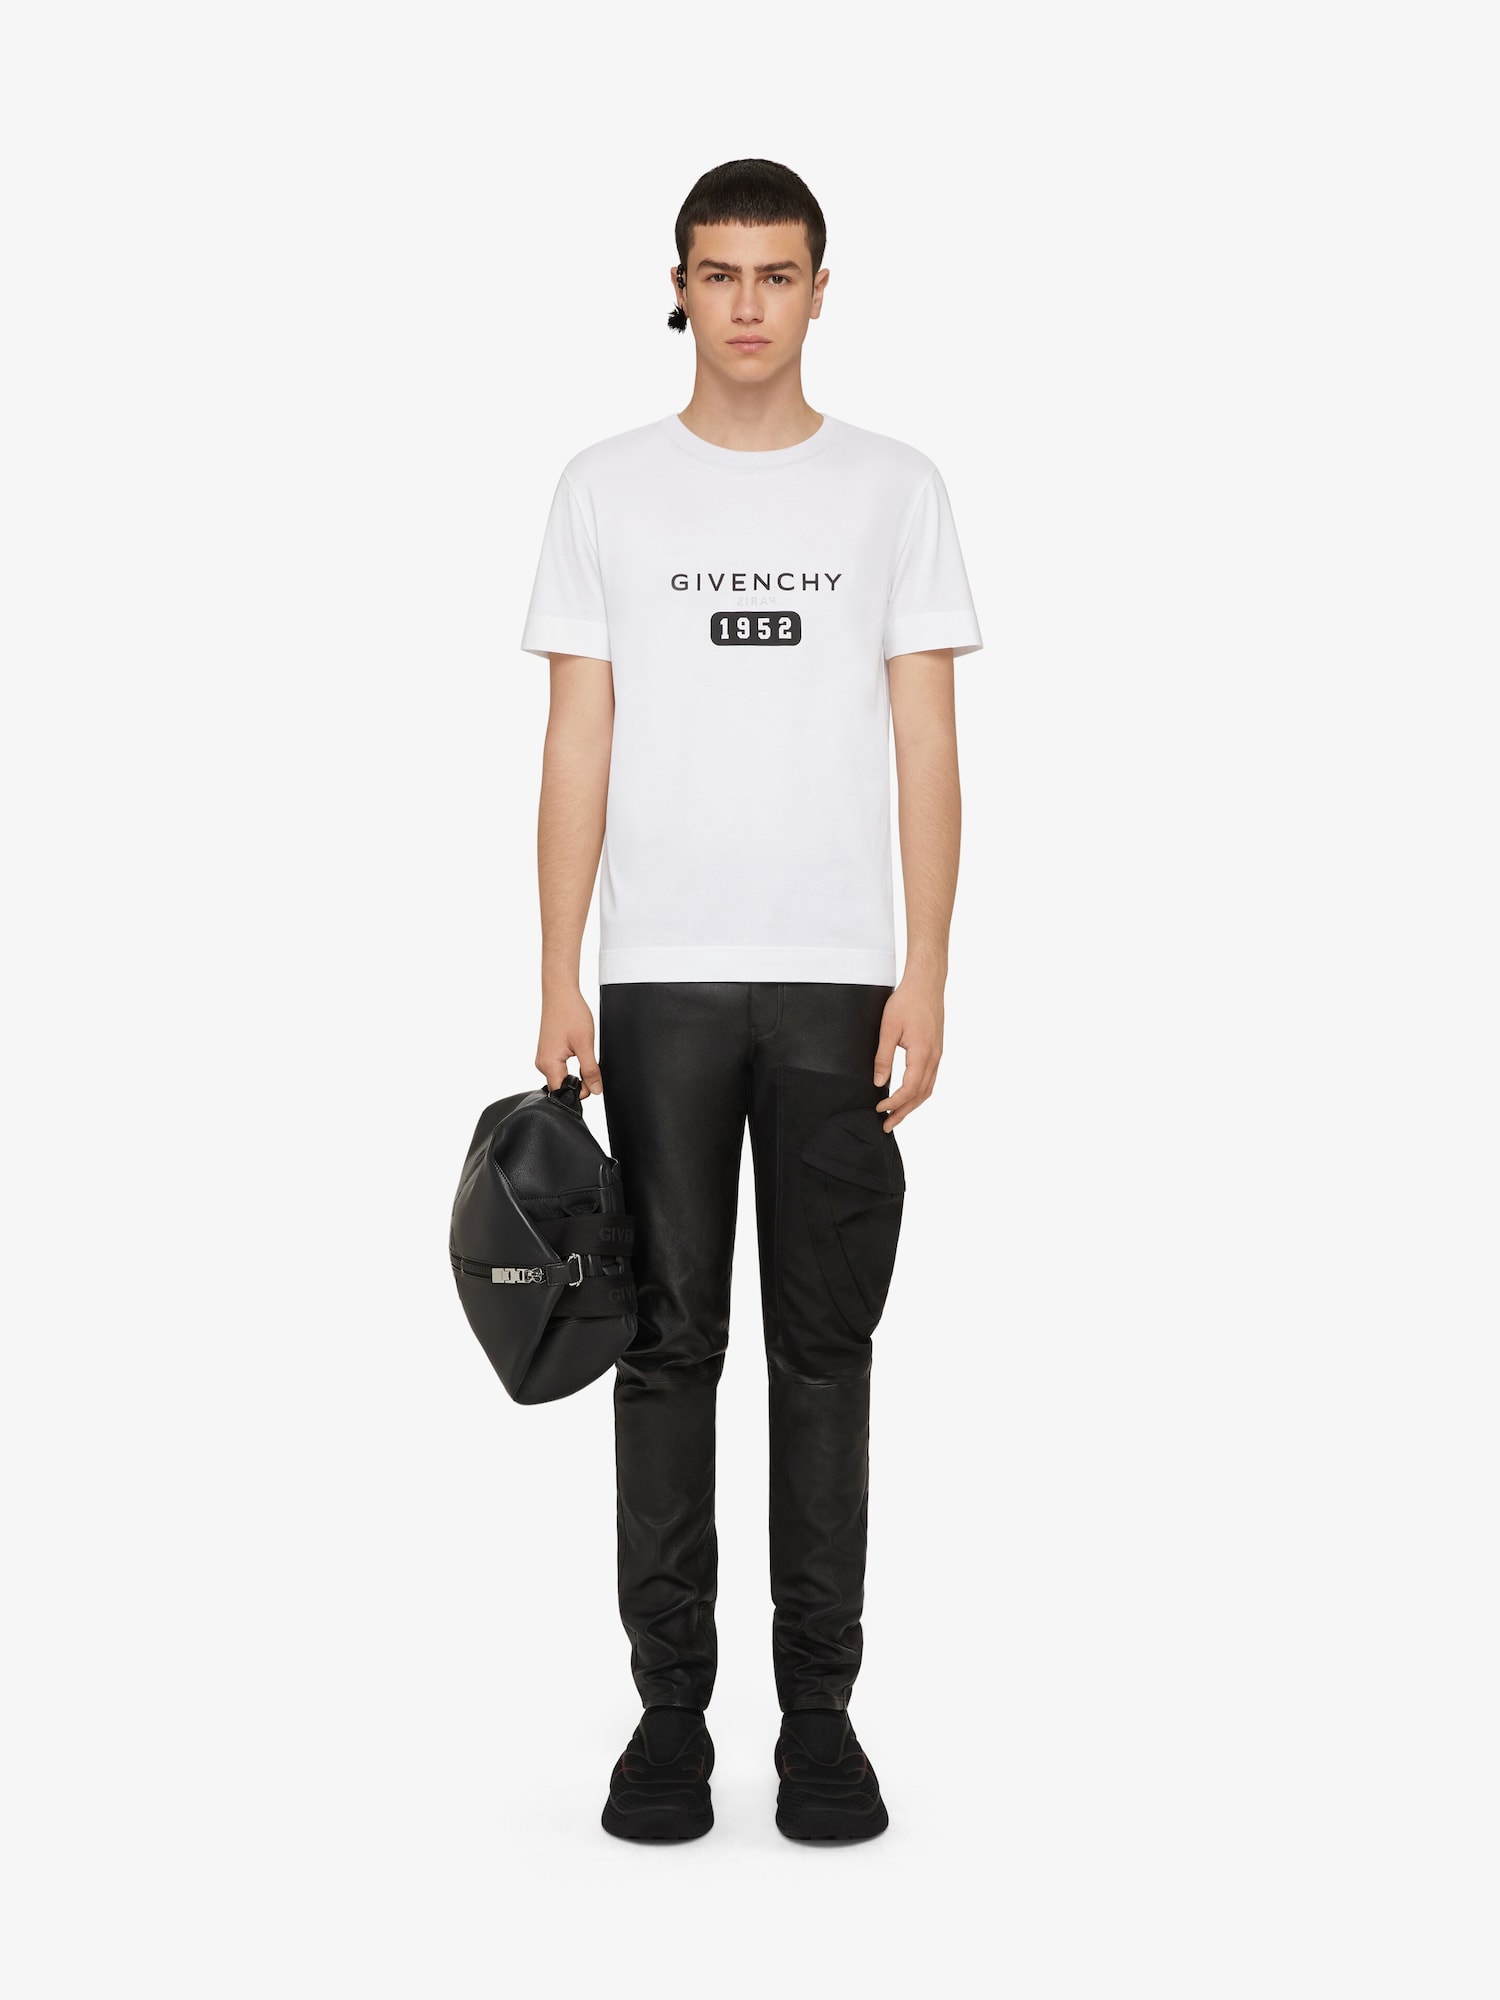 givenchy.com | Slim fit t-shirt in printed jersey